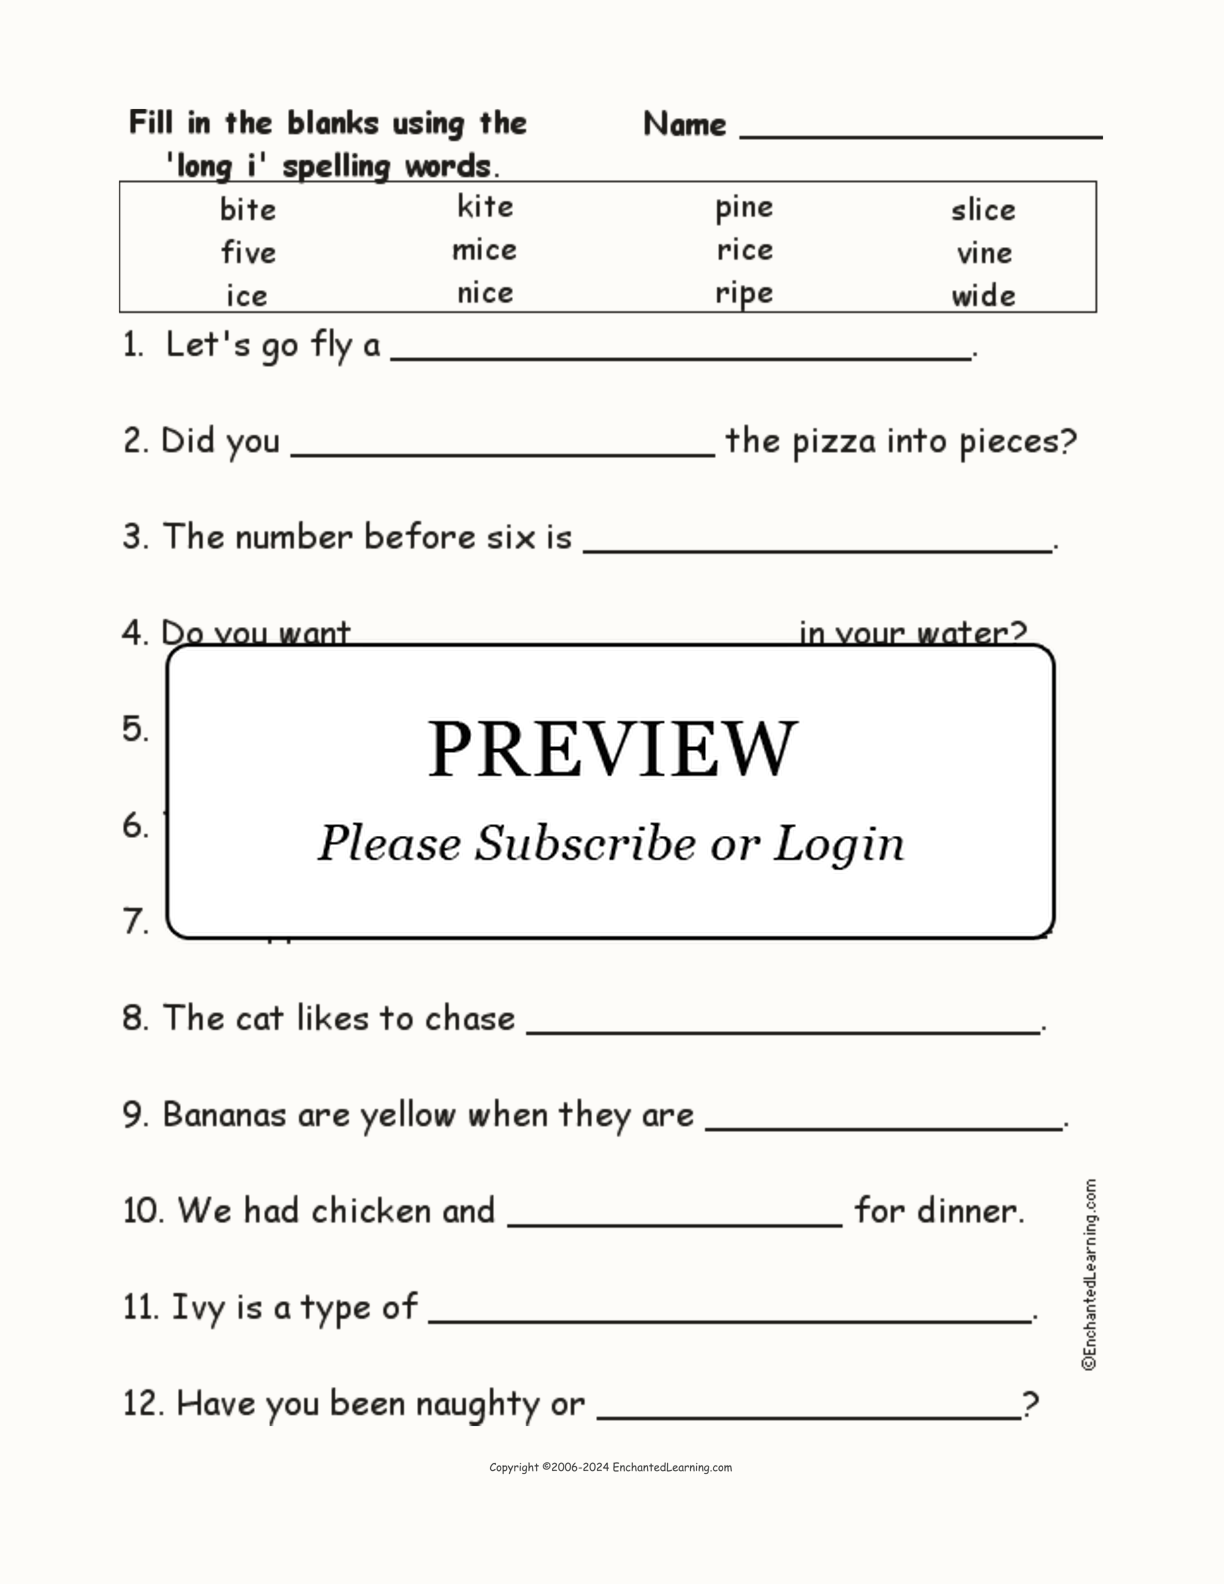 Long I: Spelling Word Questions interactive worksheet page 1